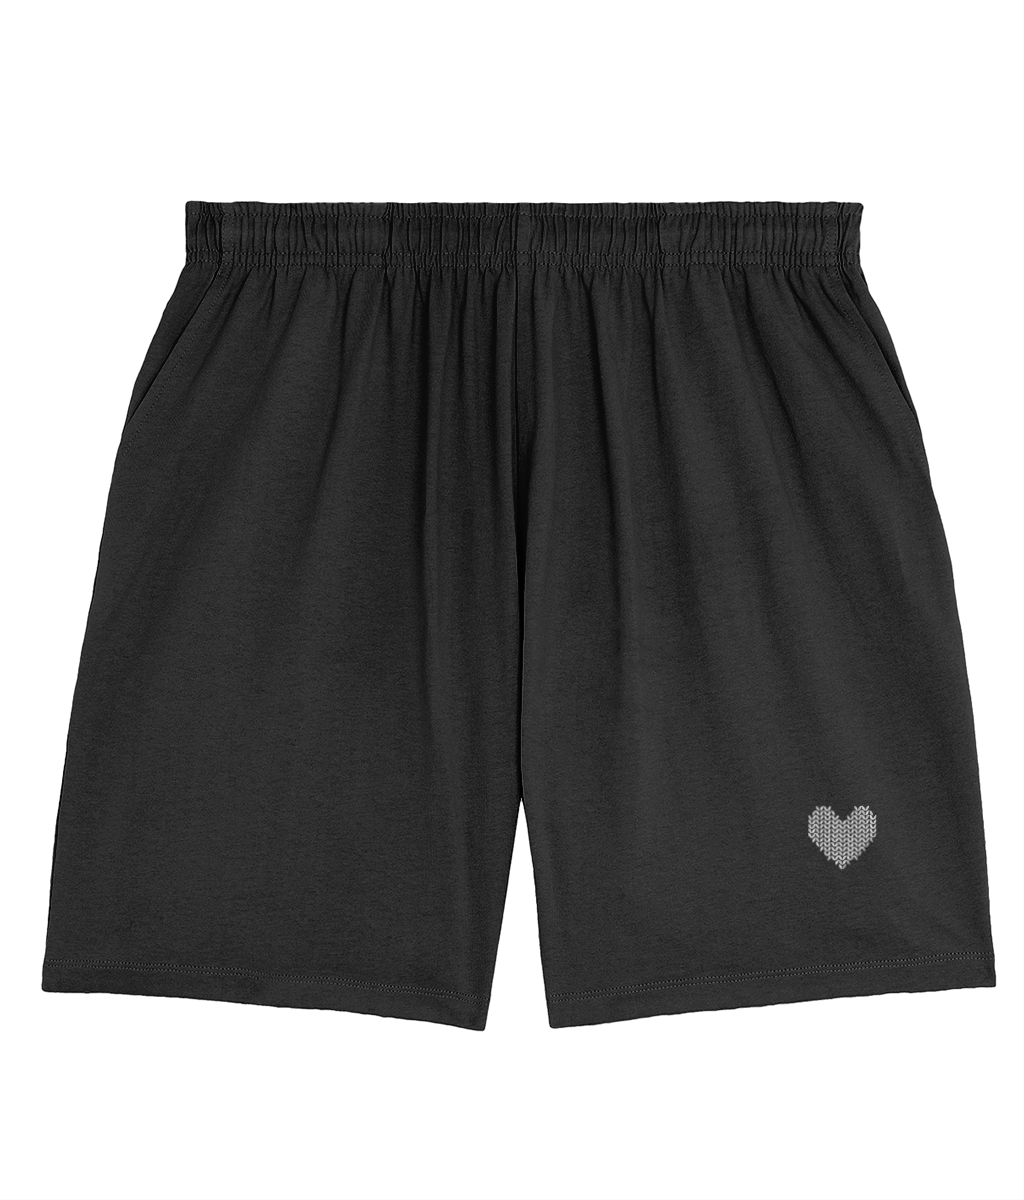 MADE WITH LOVE EMBROIDERED WHITE HEART SHORT